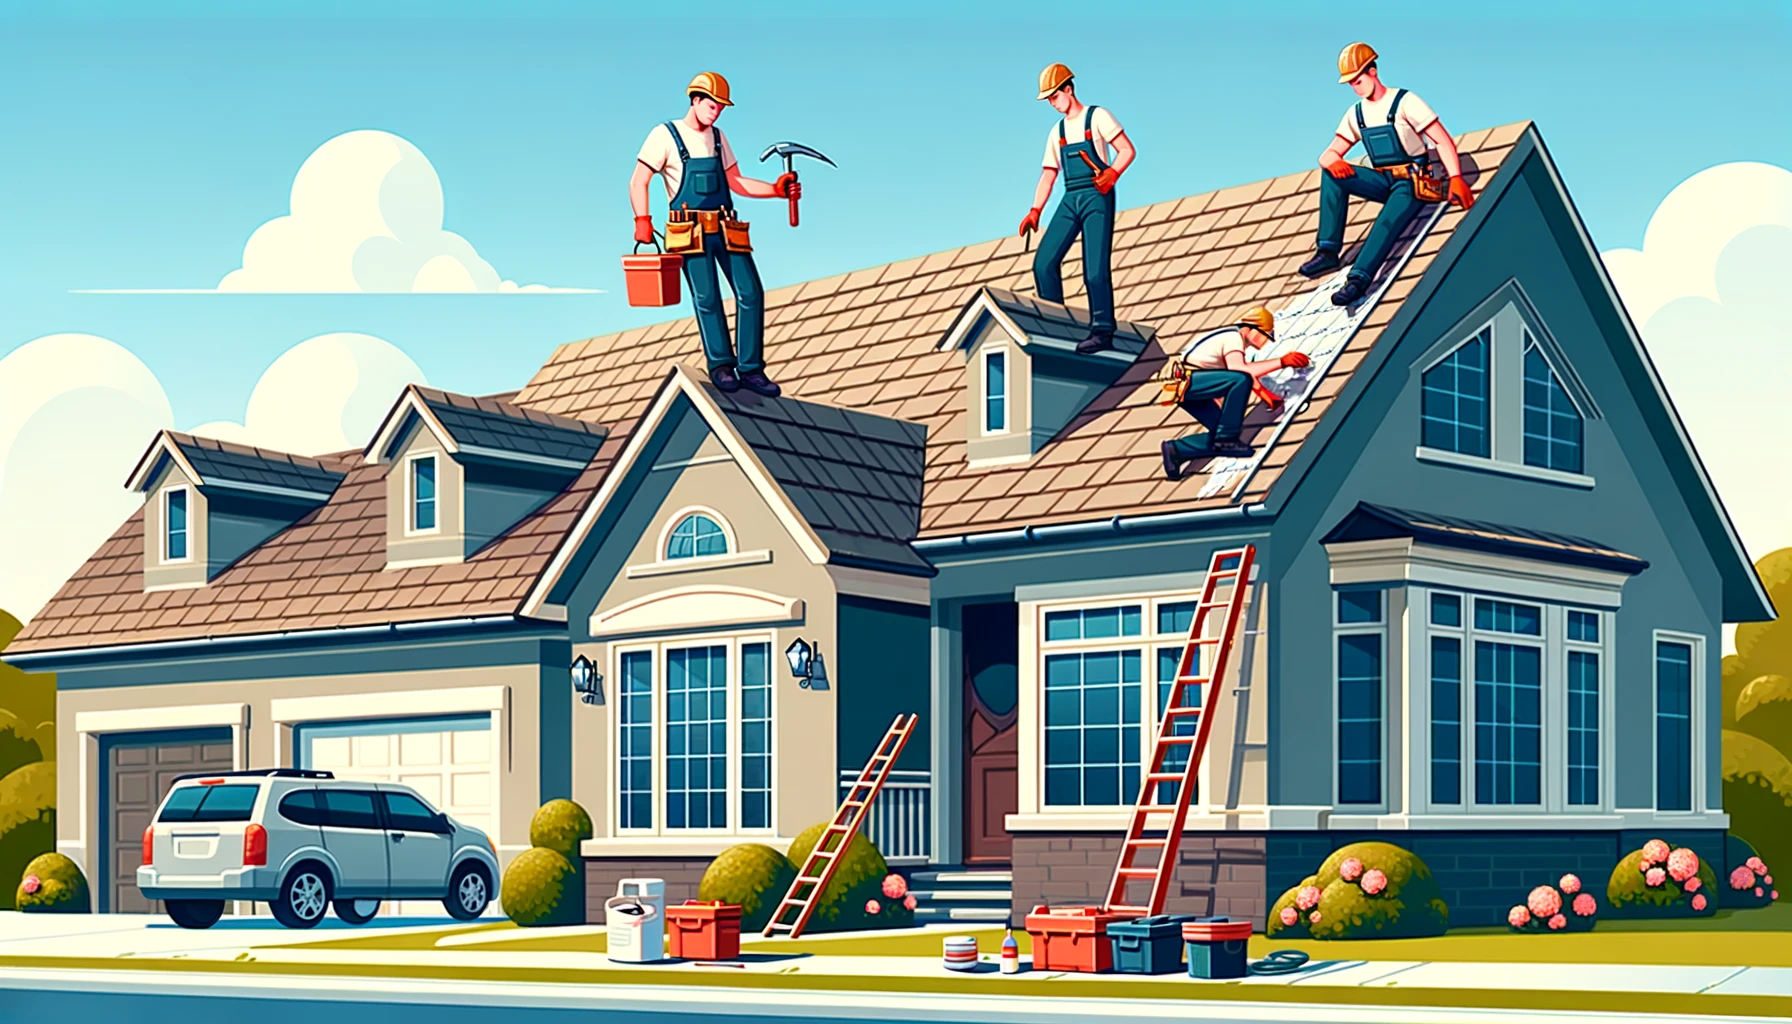 A team of roof repair specialists working on a residential house.